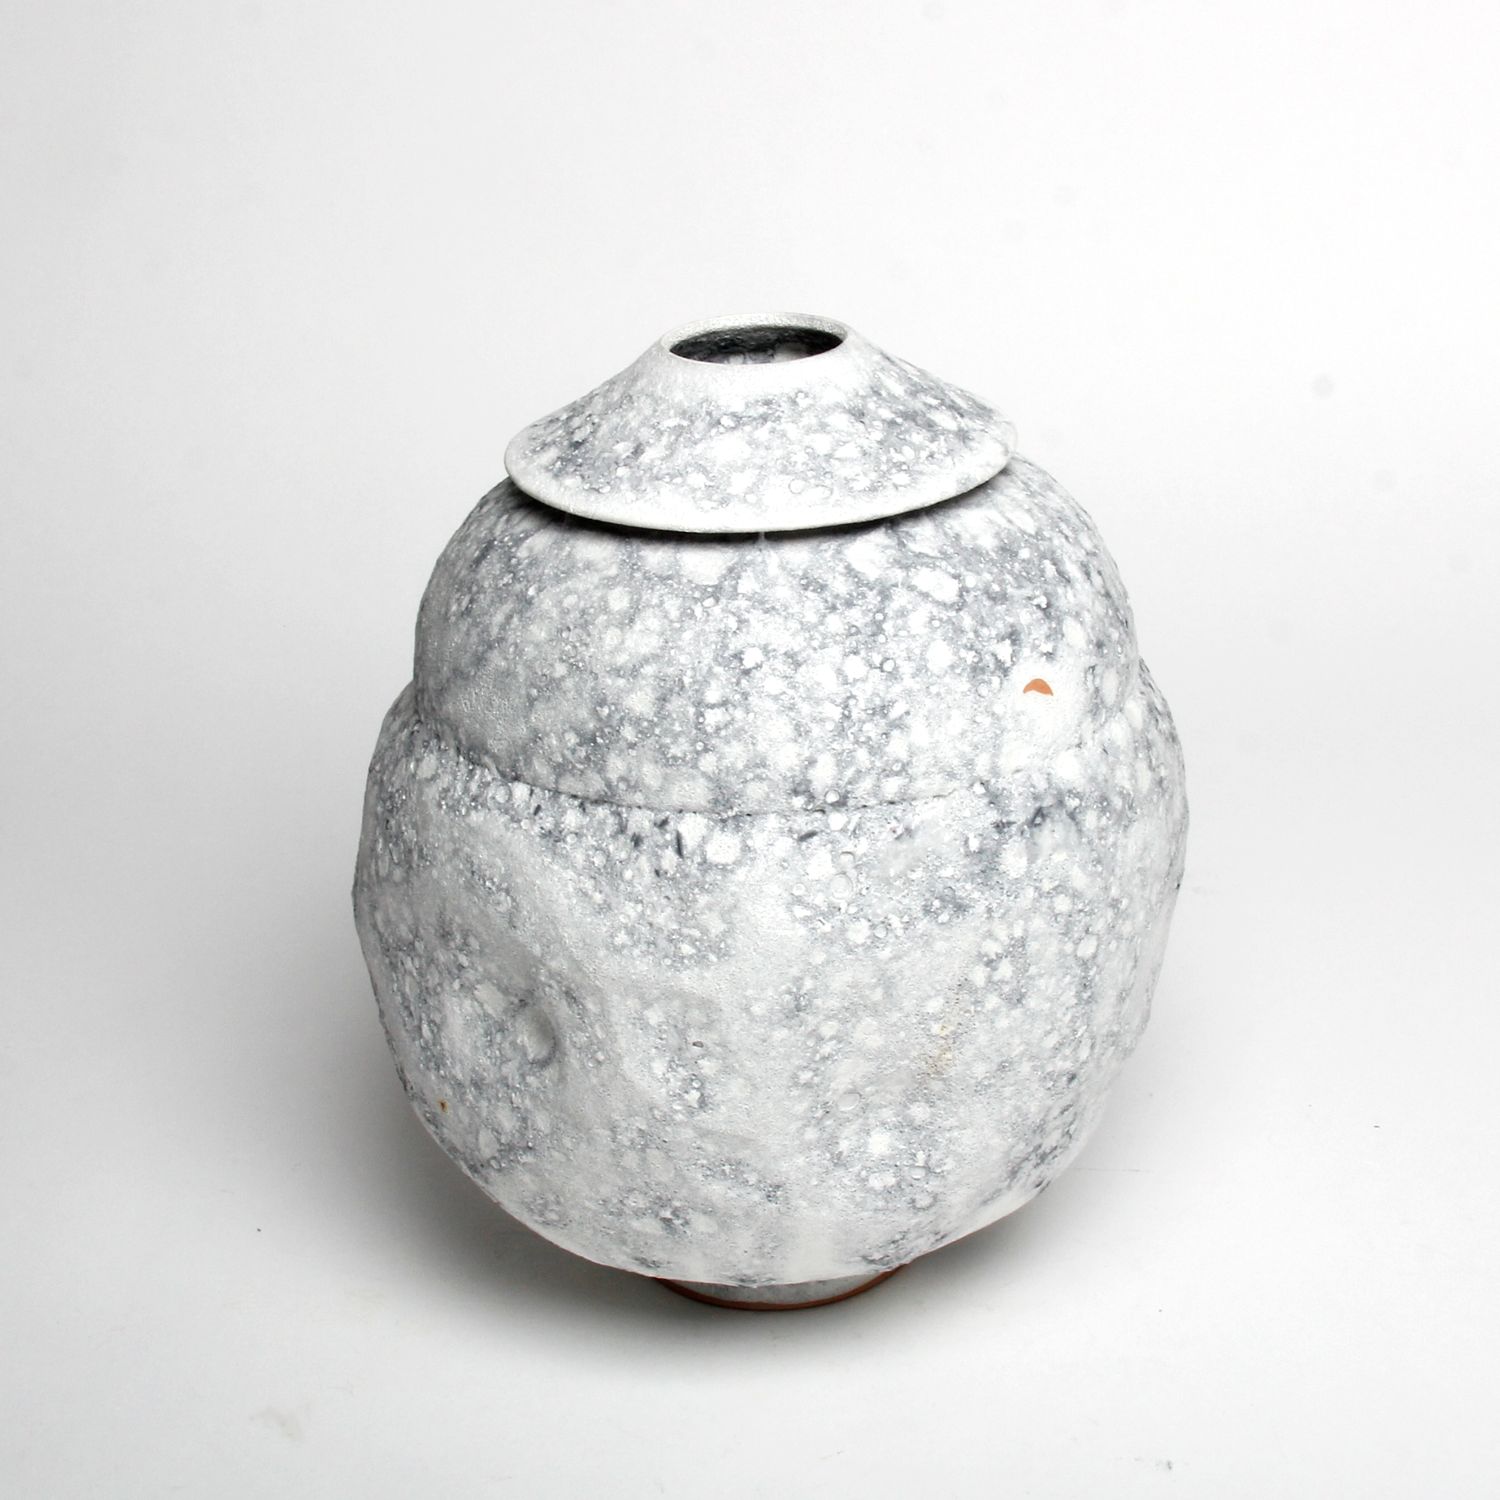 Kayo O’Young: Crater Vase Product Image 3 of 4